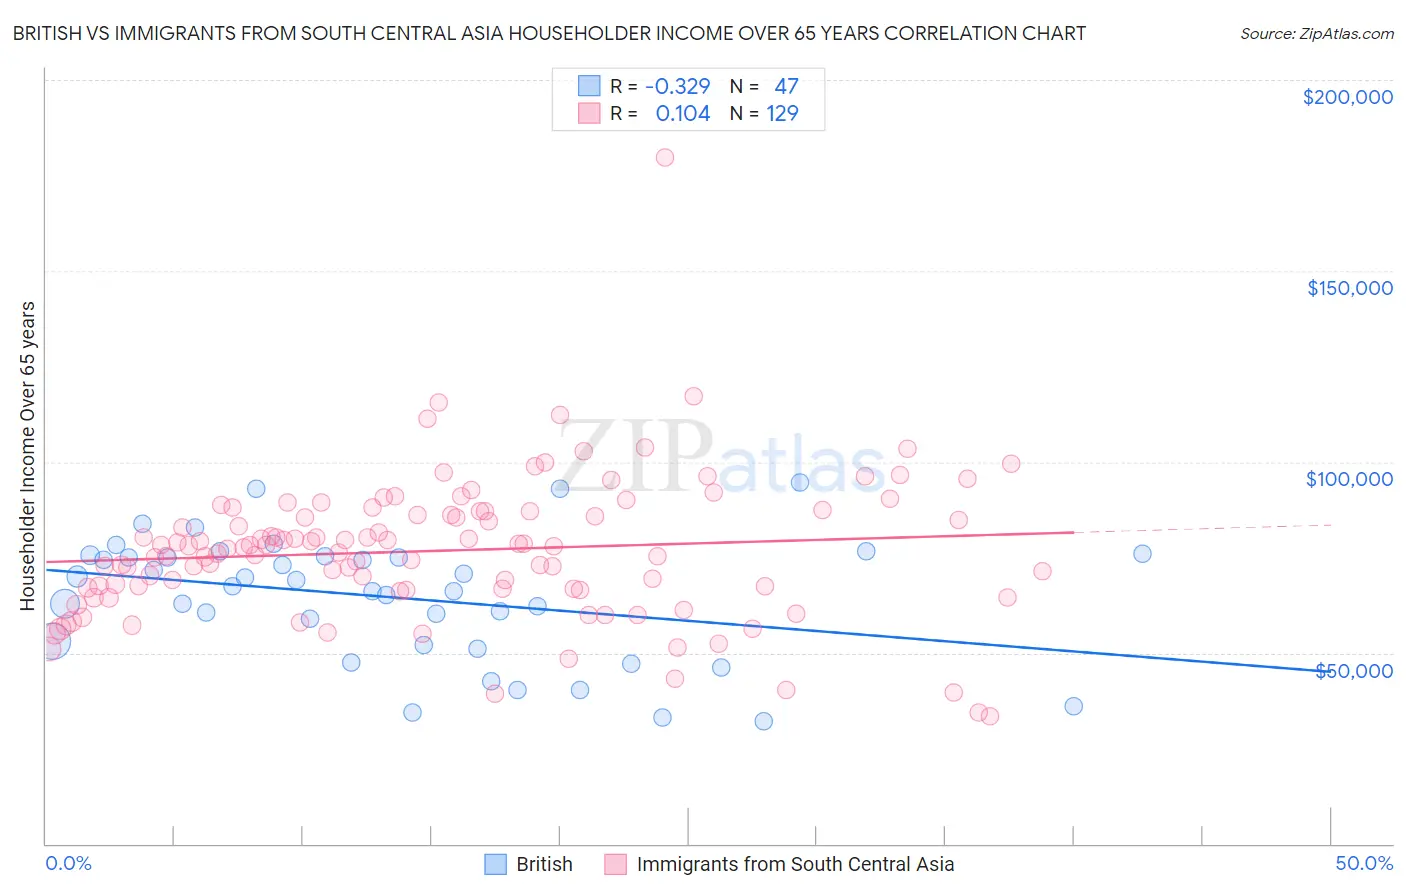 British vs Immigrants from South Central Asia Householder Income Over 65 years